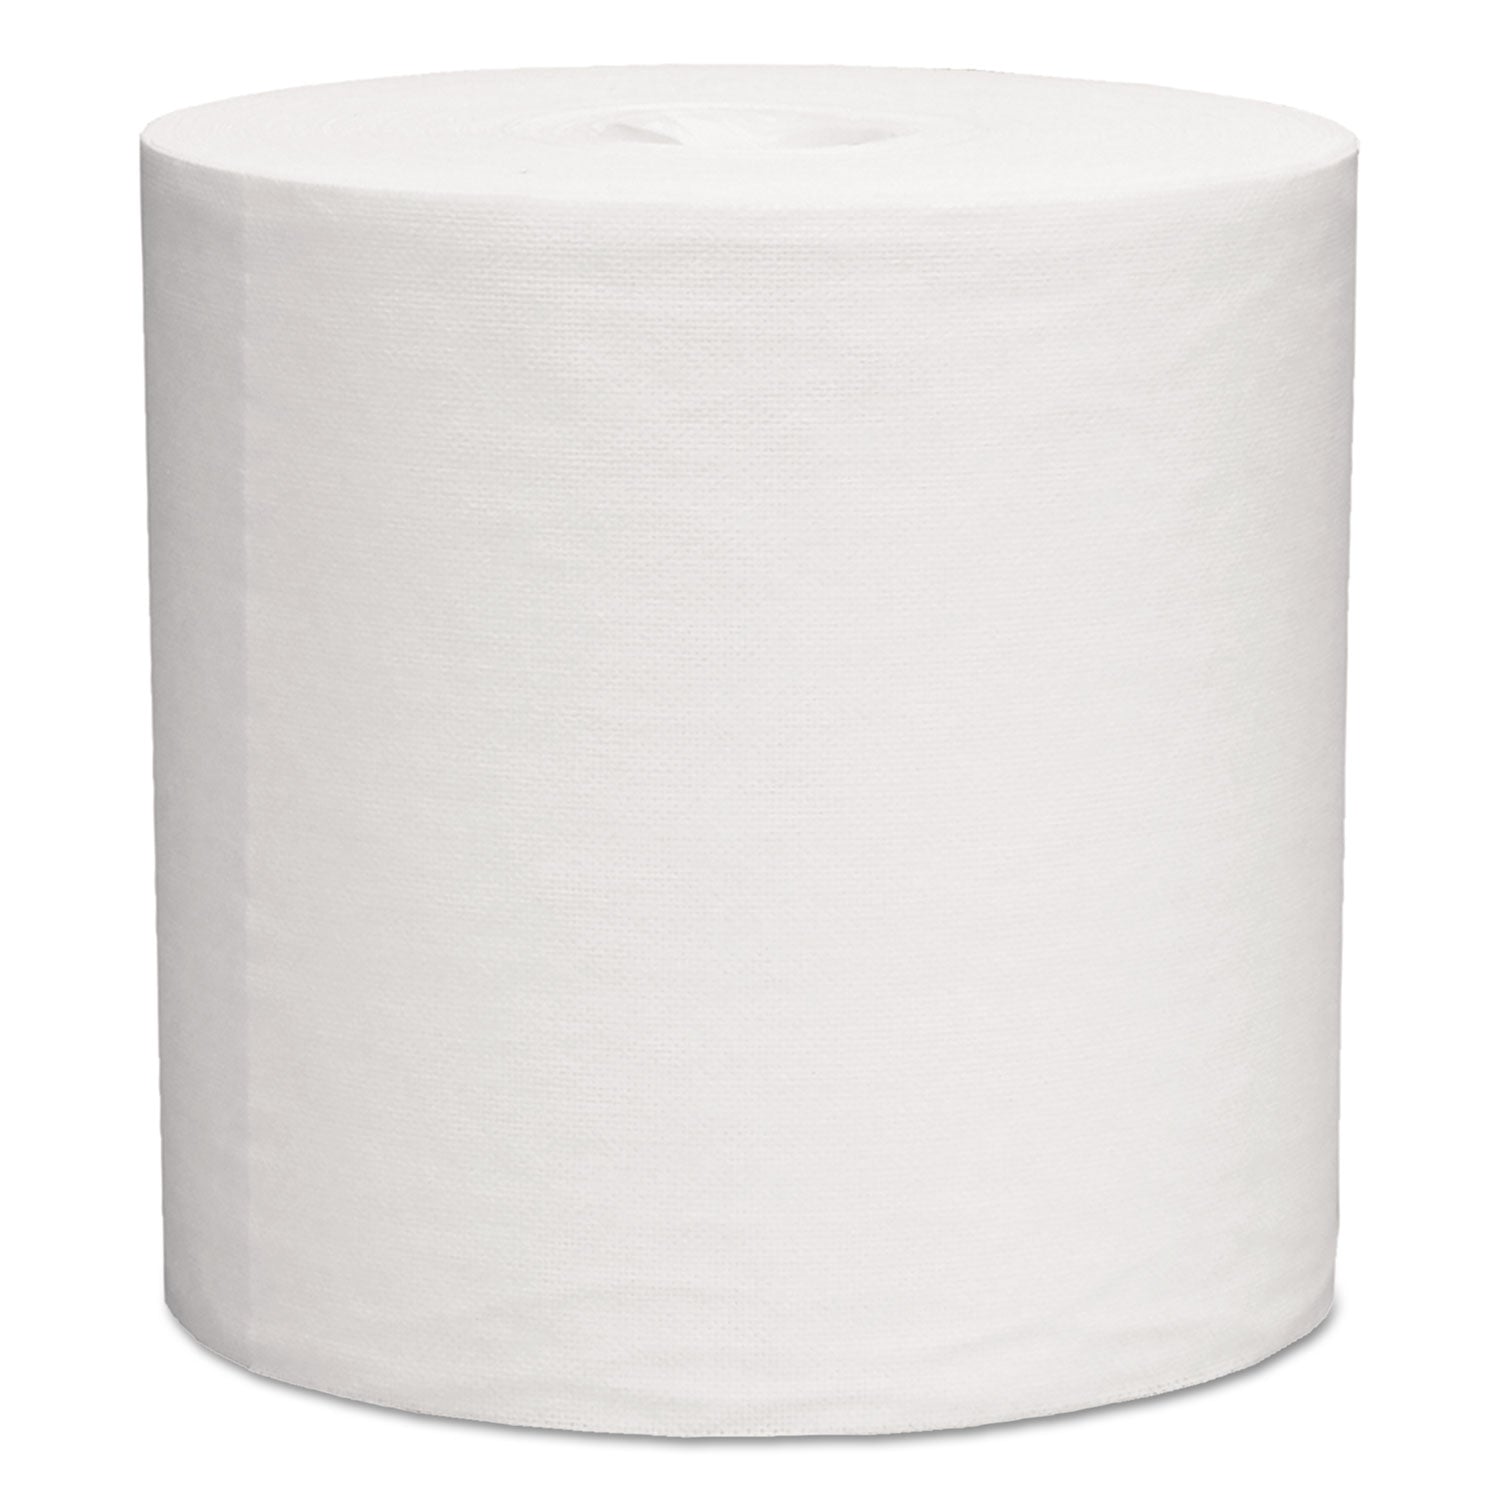 l40-towels-center-pull-10-x-132-white-200-roll-2-carton_kcc05796 - 1